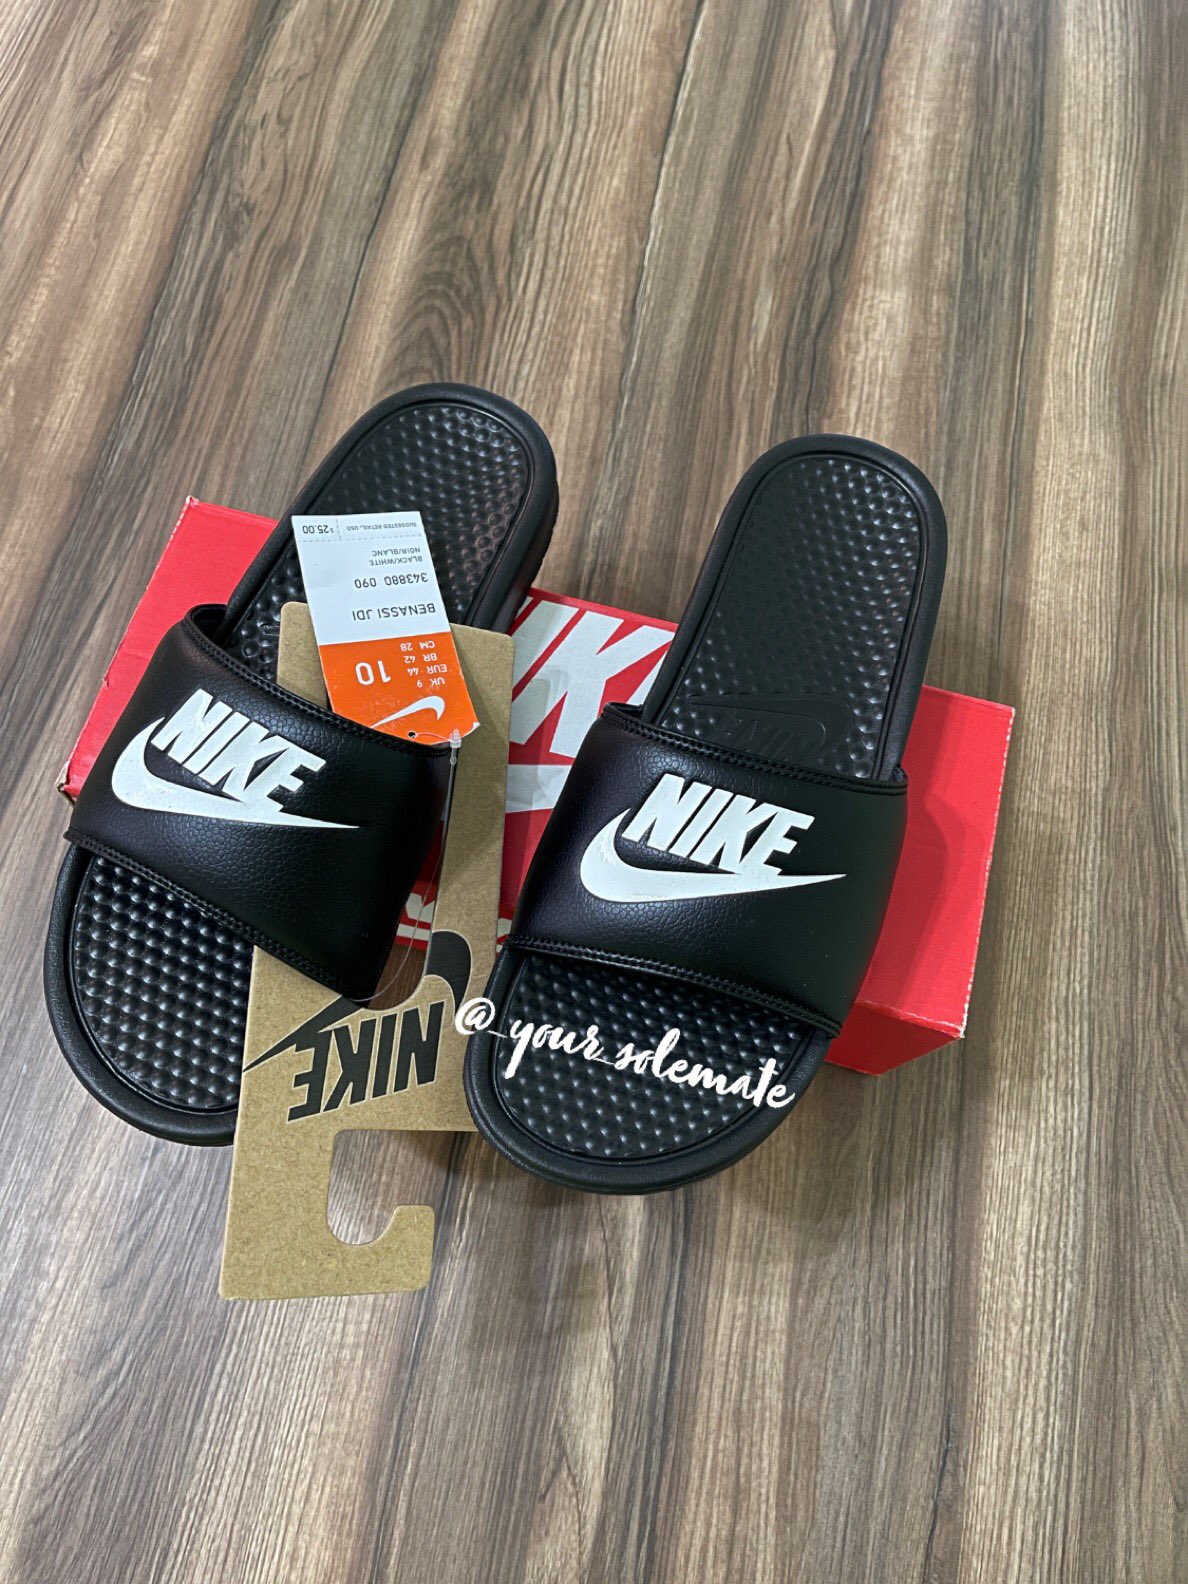 toxiciteit onbekend etiquette THE _PLUG on Twitter: "Original nike benassi slides Available in sizes  43.5,44,45,46 and 49.5 250 cedis Kindly retweet for me  https://t.co/vGR4JDKhFF" / Twitter